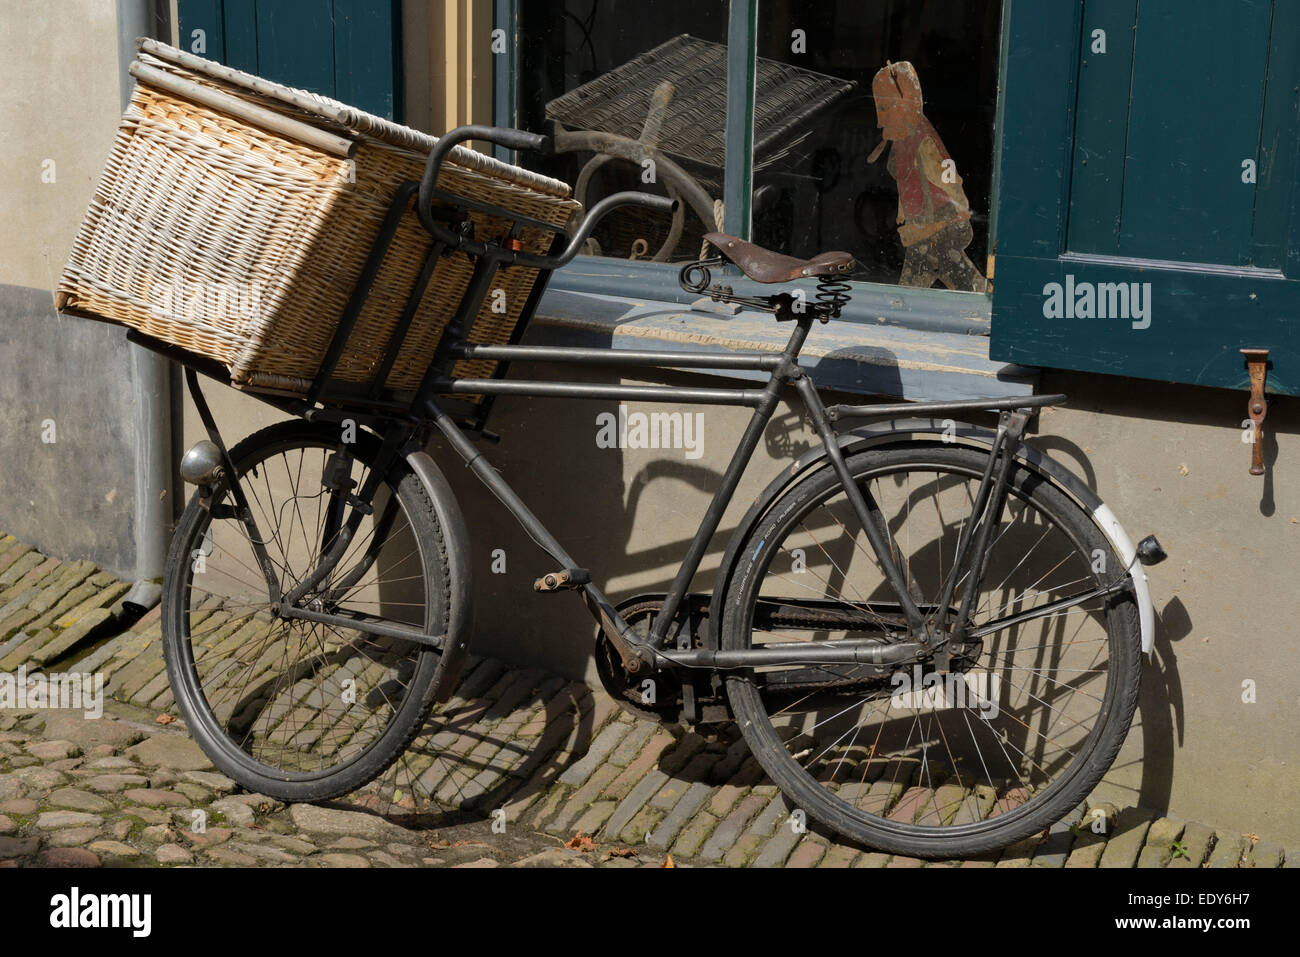 Traditional bicycle outside a buildings, Zuiderzee open air museum, Lake Ijssel, Enkhuizen, North Holland, Netherlands, Europe Stock Photo